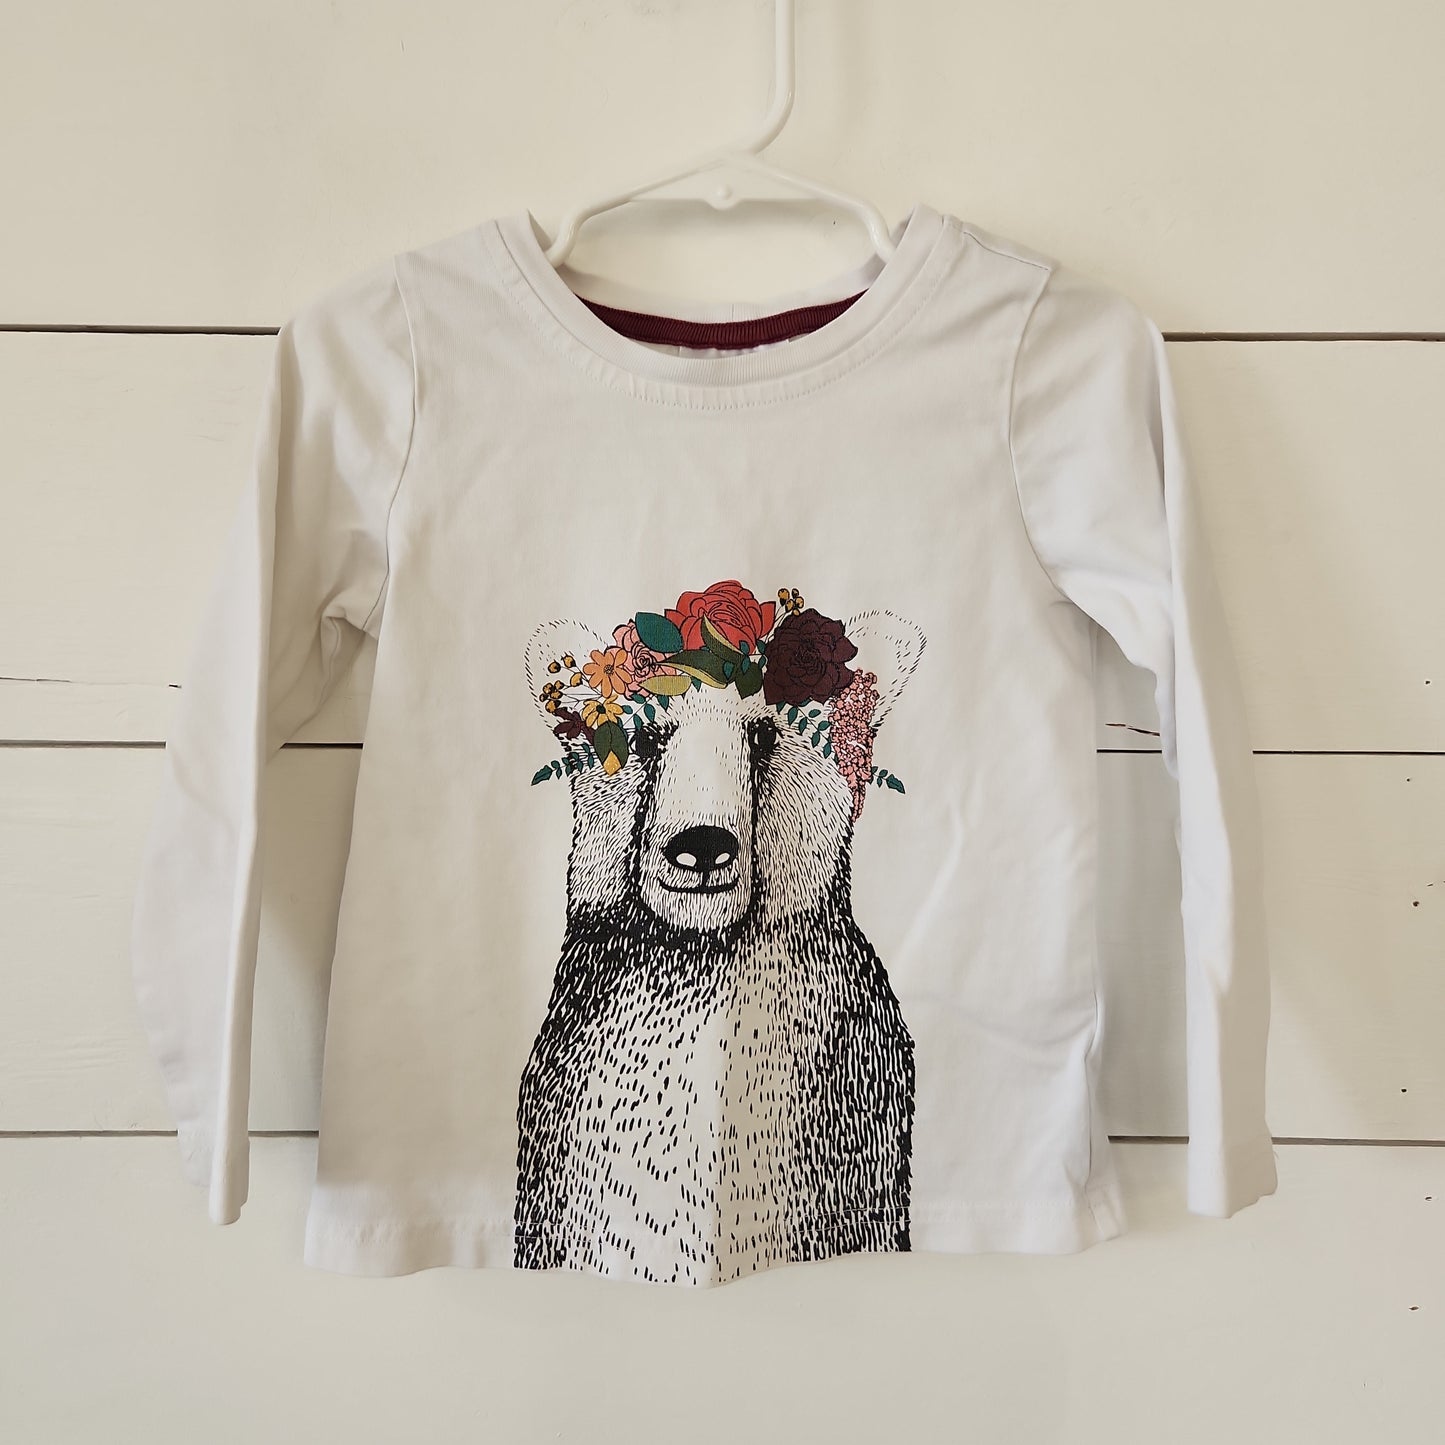 Size 4t | Hanna Andersson Shirt